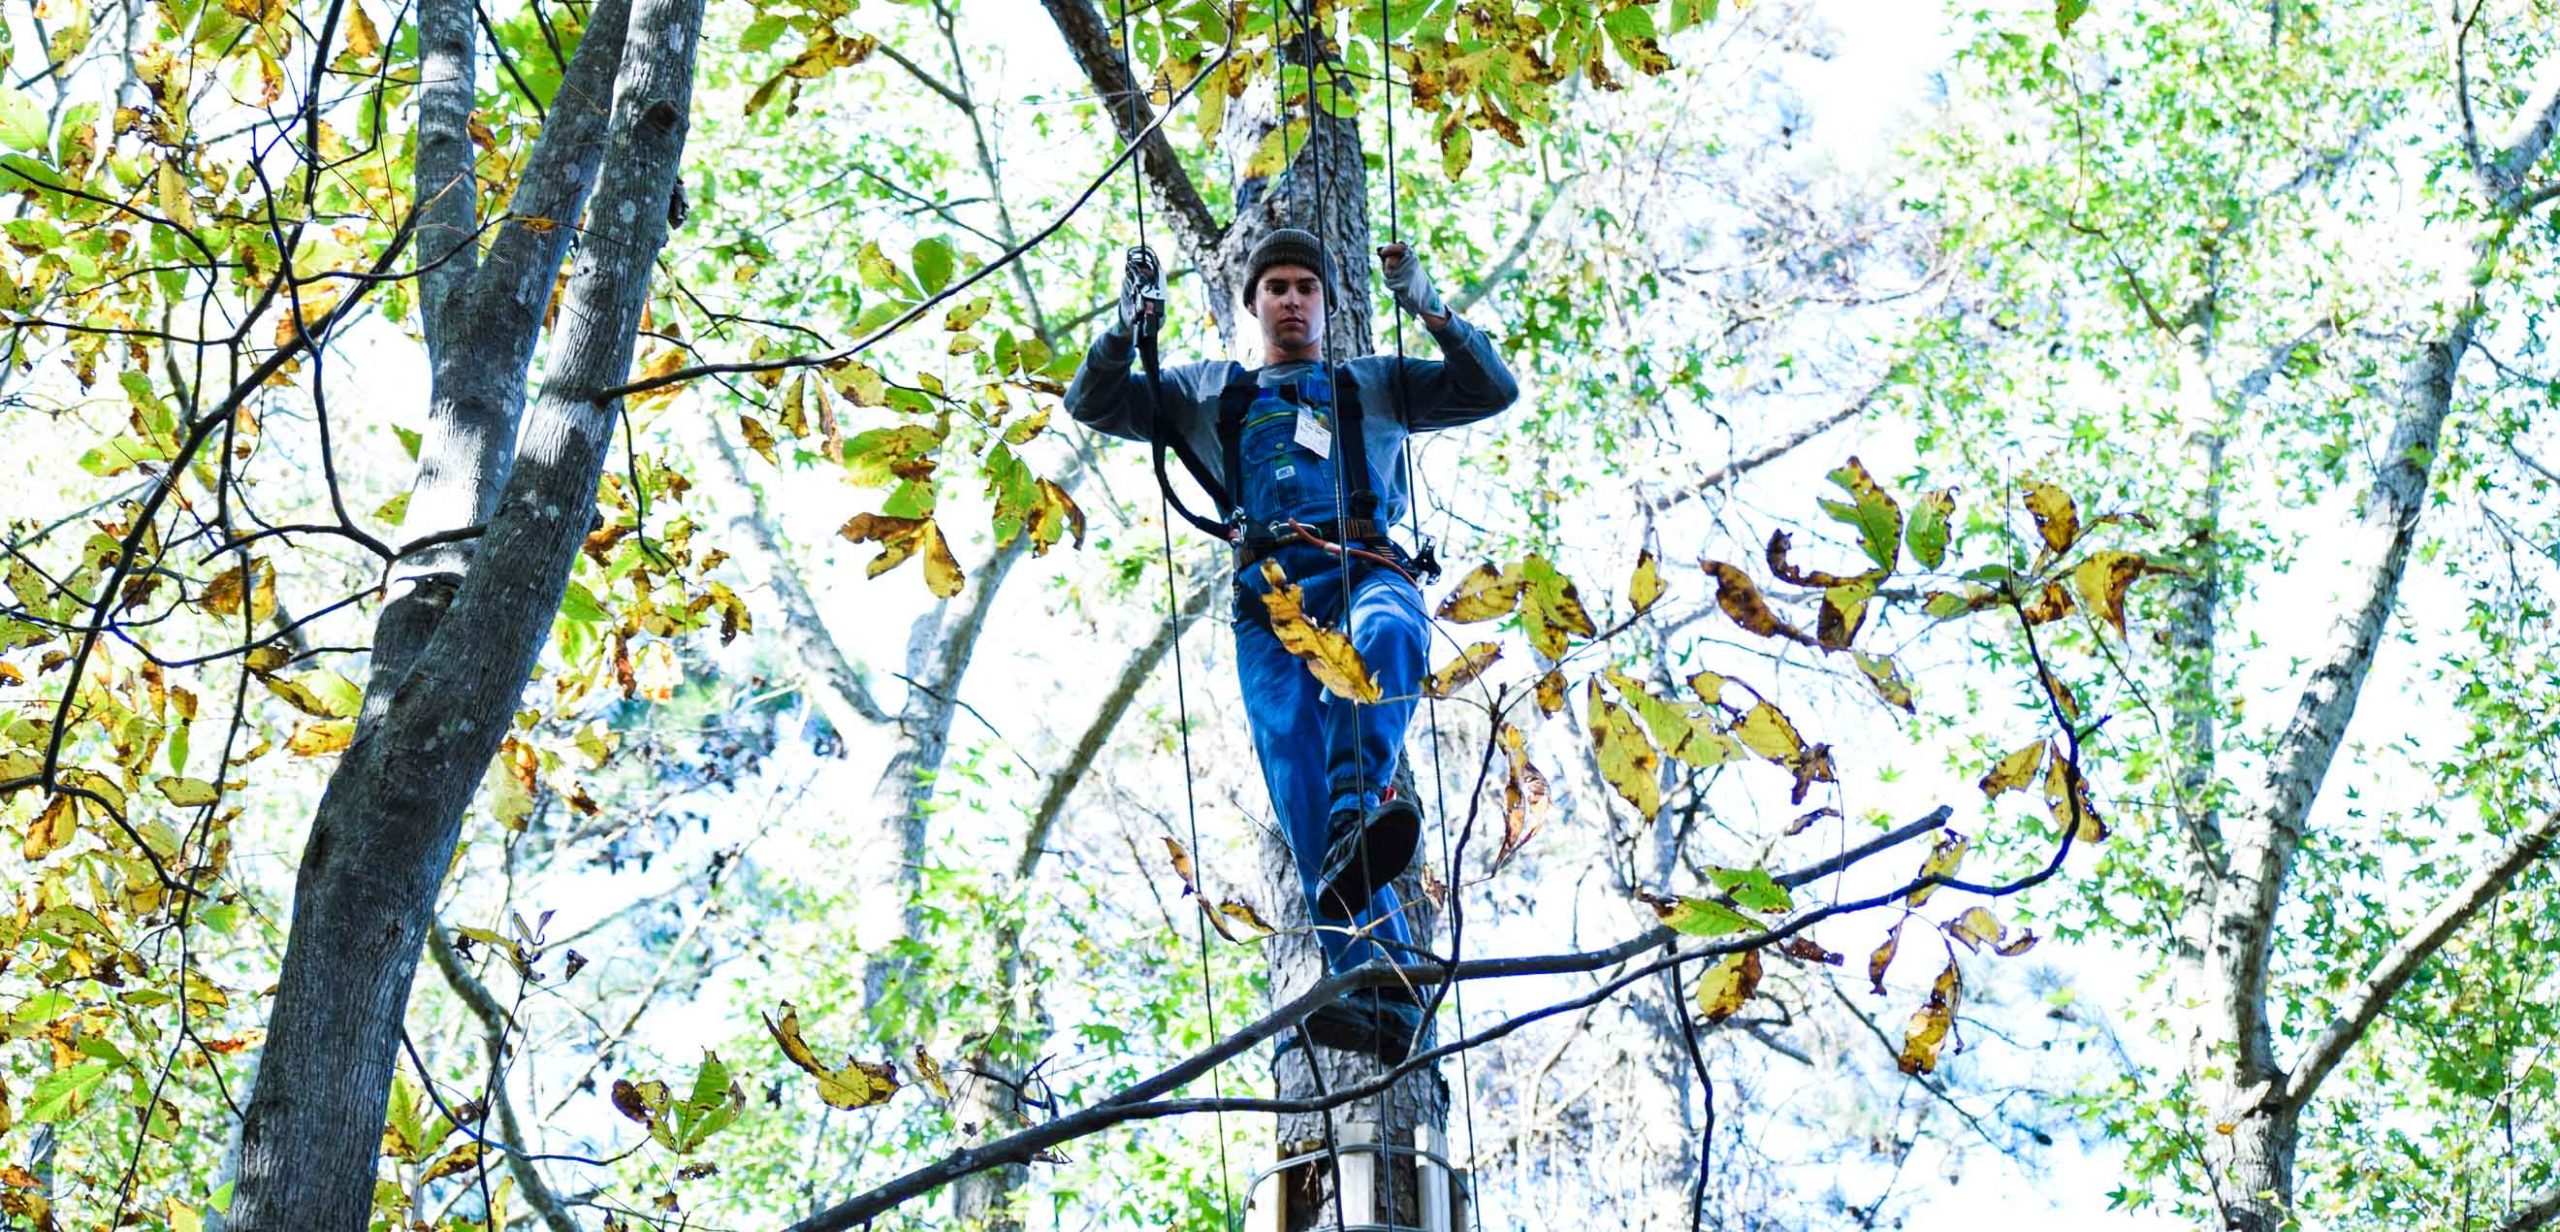 Adult on challenge course